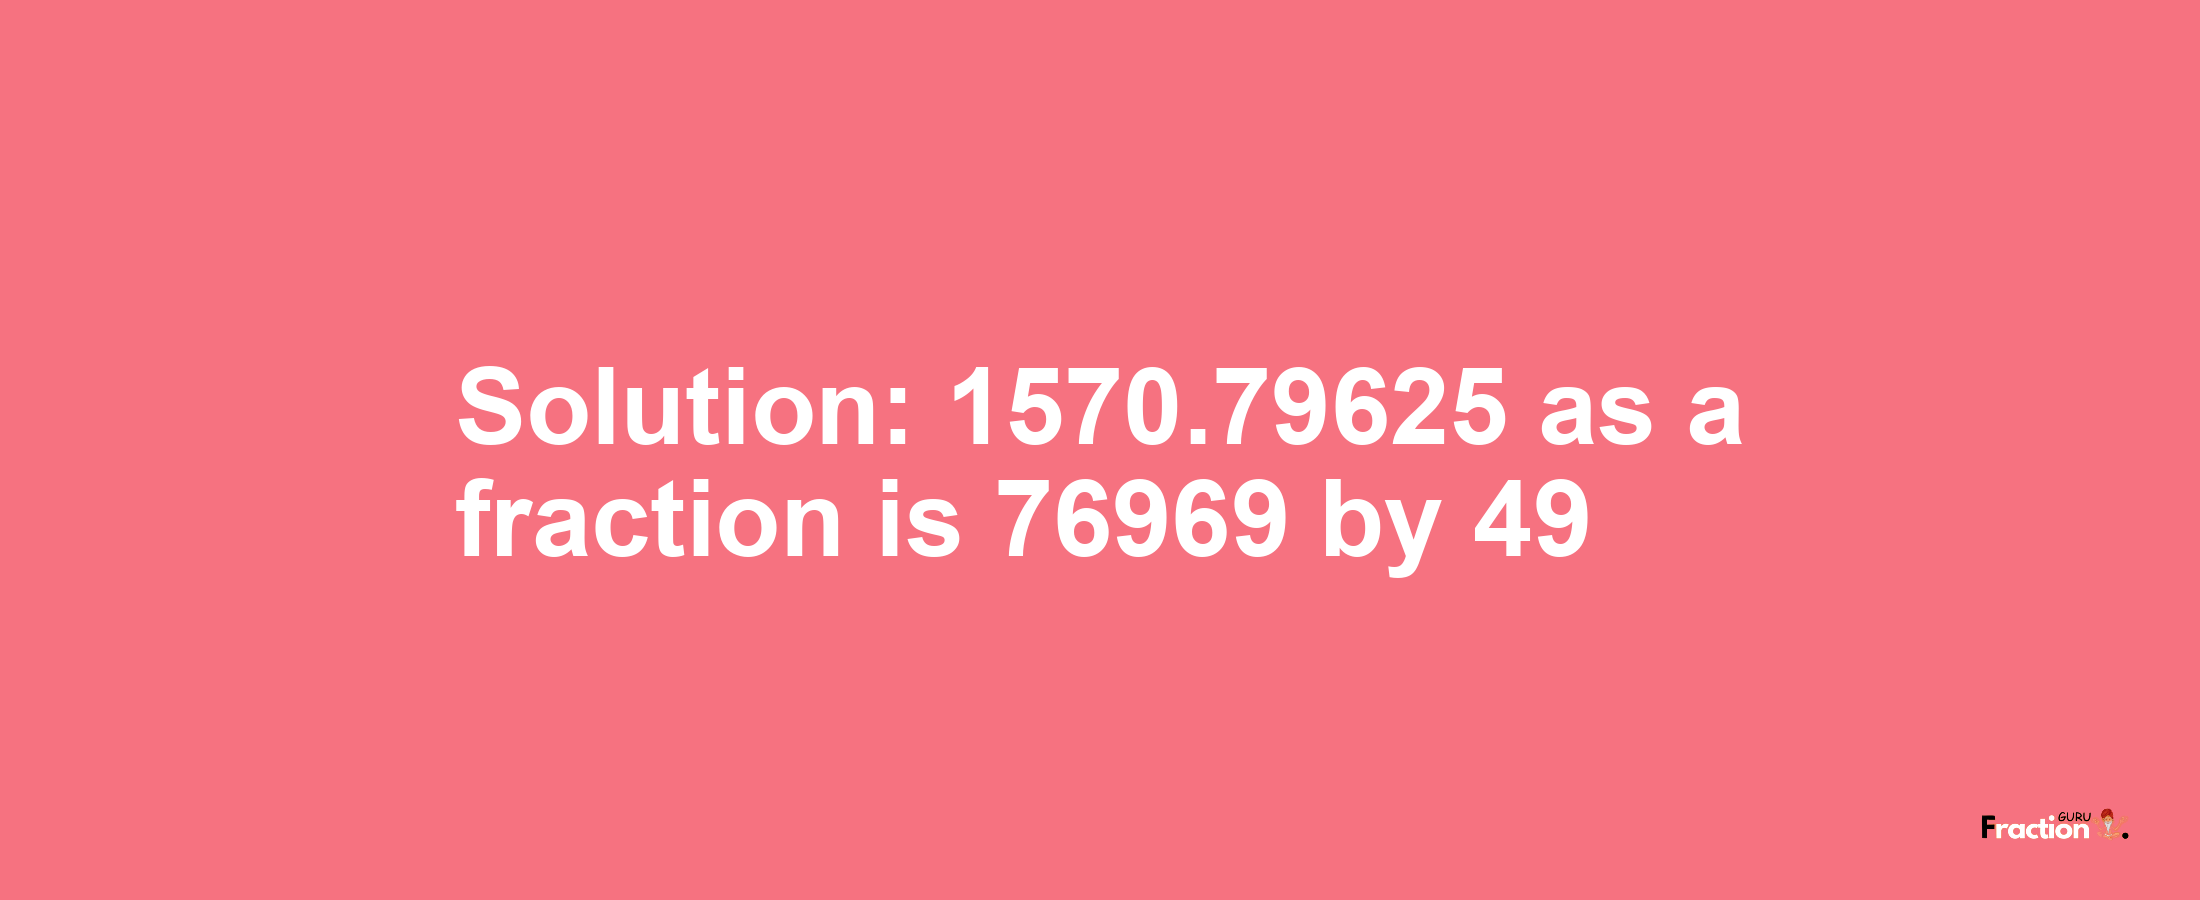 Solution:1570.79625 as a fraction is 76969/49